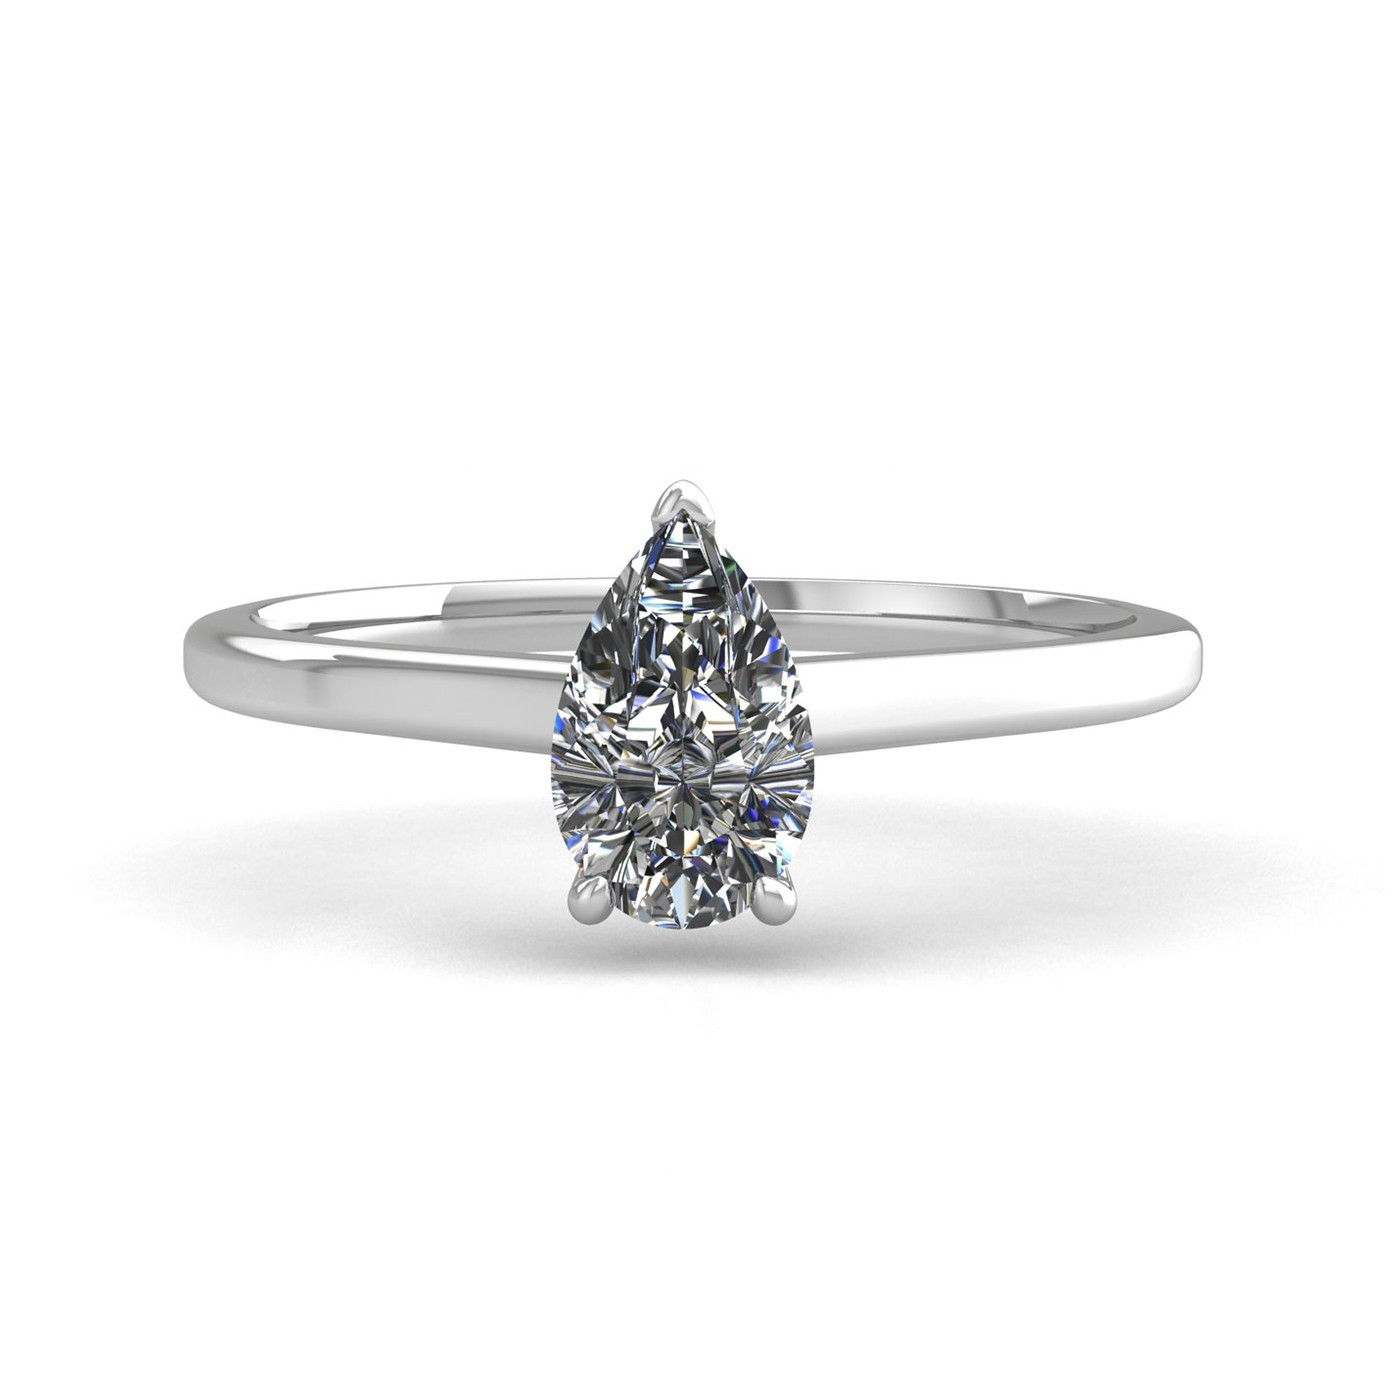 18k white gold  1,50 ct 3 prongs solitaire pear cut diamond engagement ring with whisper thin band Photos & images